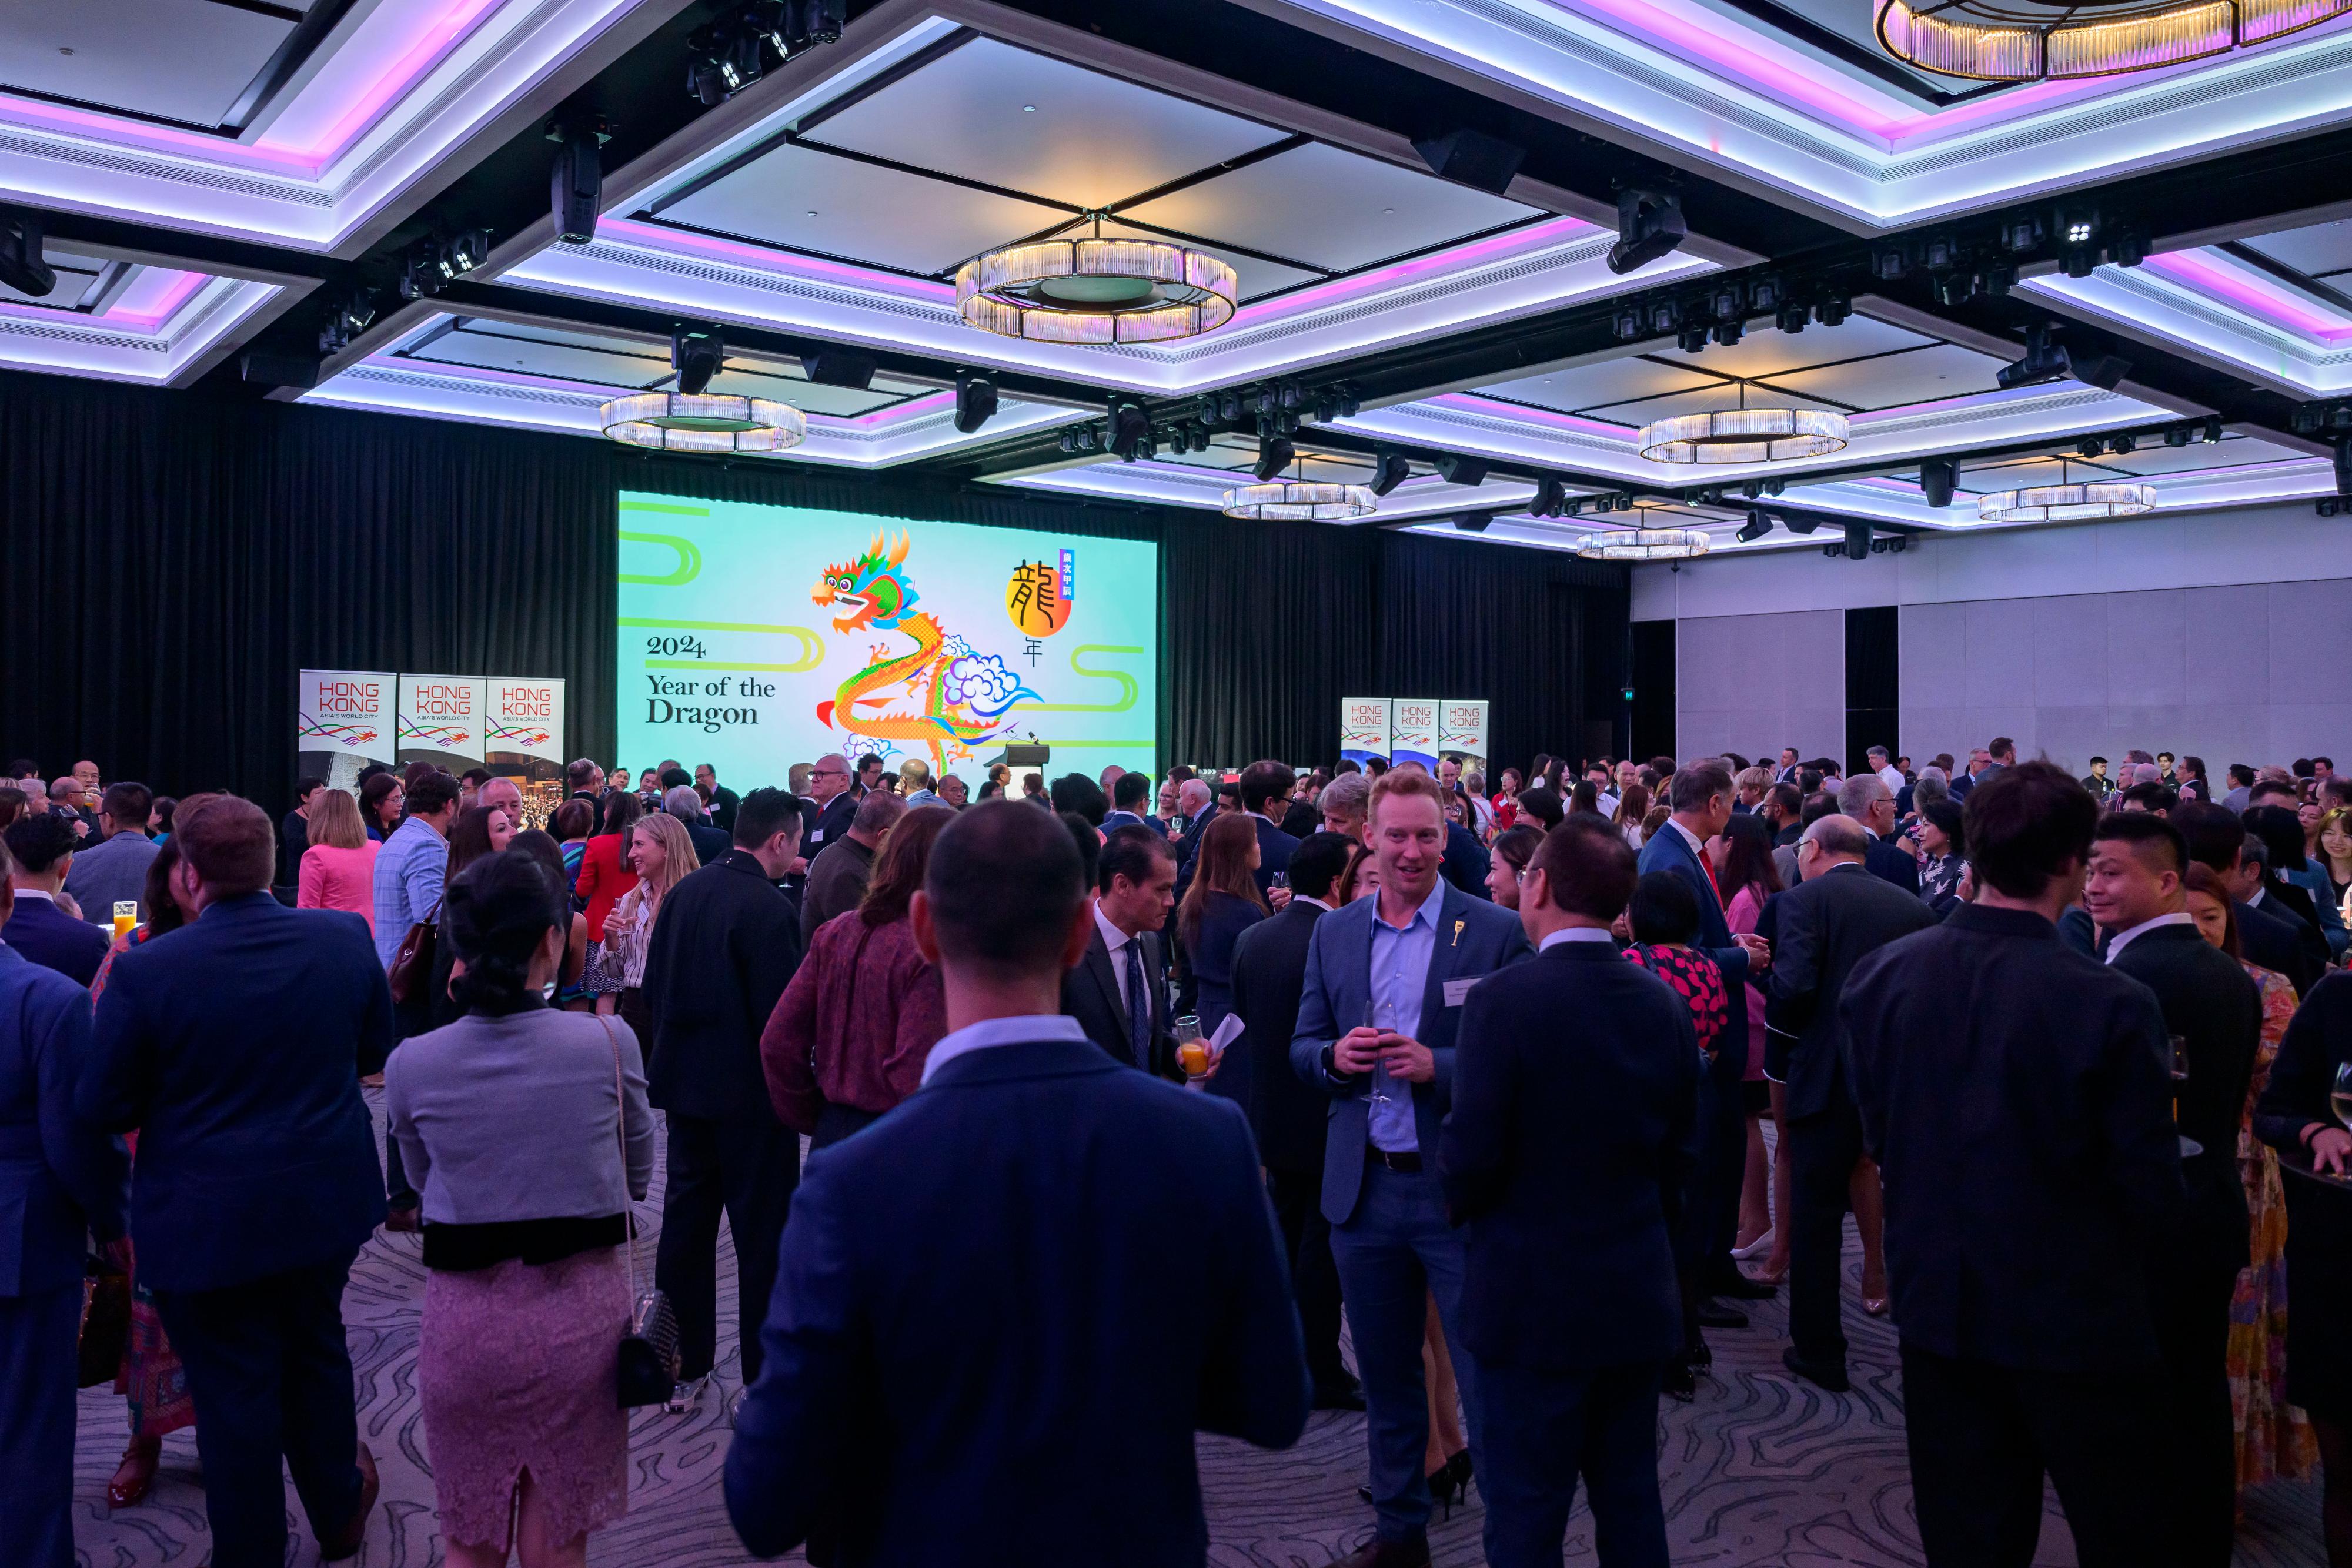 The Hong Kong Economic and Trade Office, Sydney hosted a reception in Sydney, Australia, yesterday (February 20) to celebrate the Year of the Dragon. Over 400 guests from various sectors including political and business circles, media, academic and community groups as well as government representatives attended the reception.